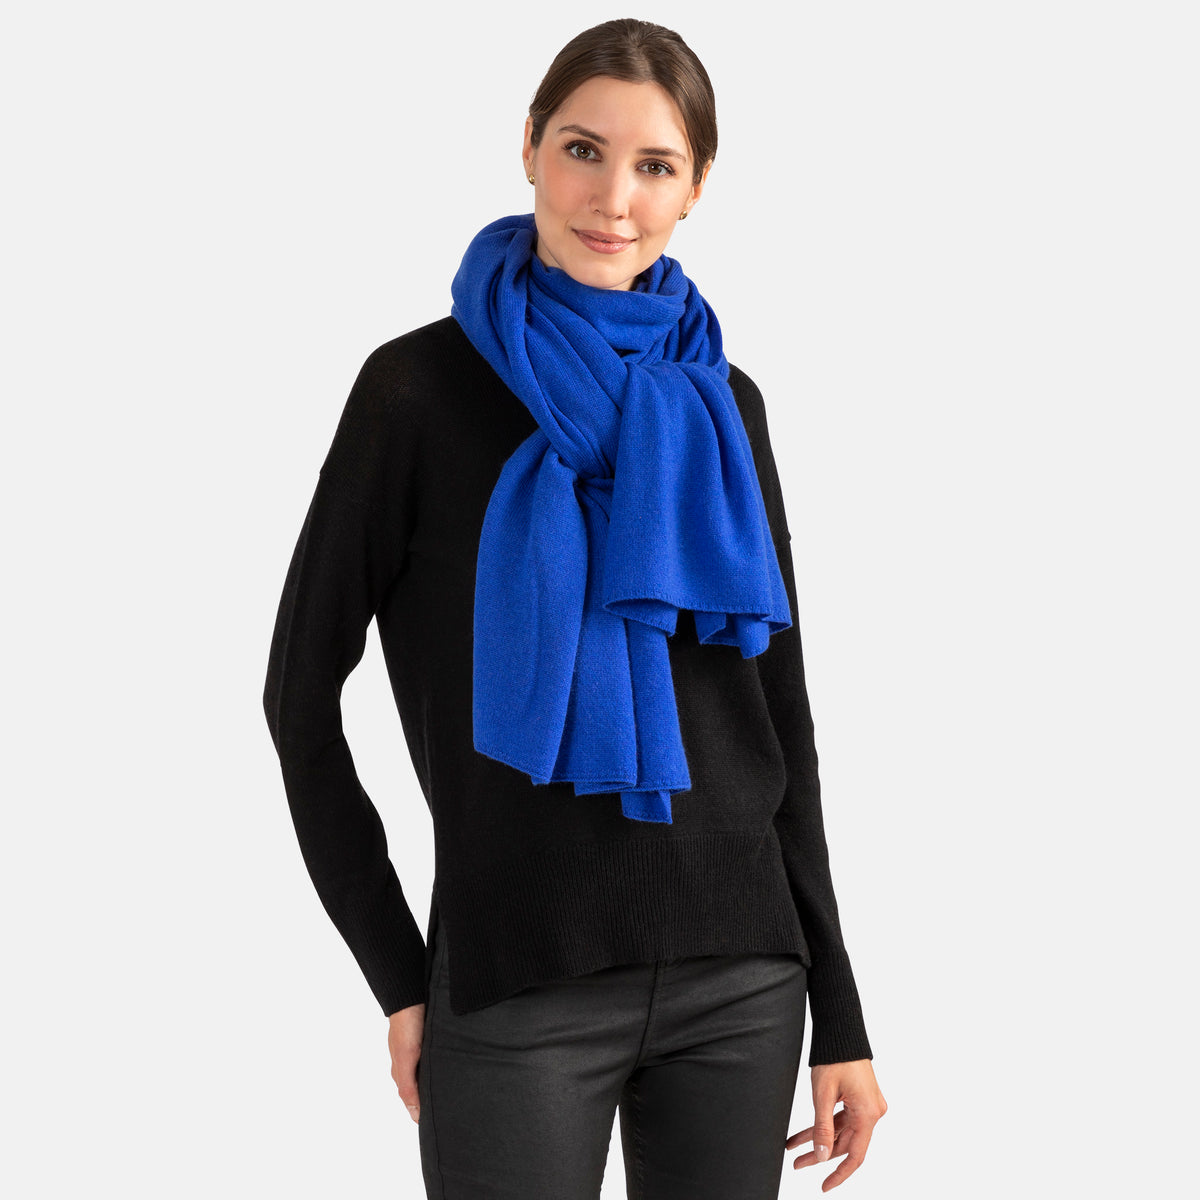 Picture of a woman wearing a cobalt blue cashmere jersey knitted oversize scarf or travel wrap.